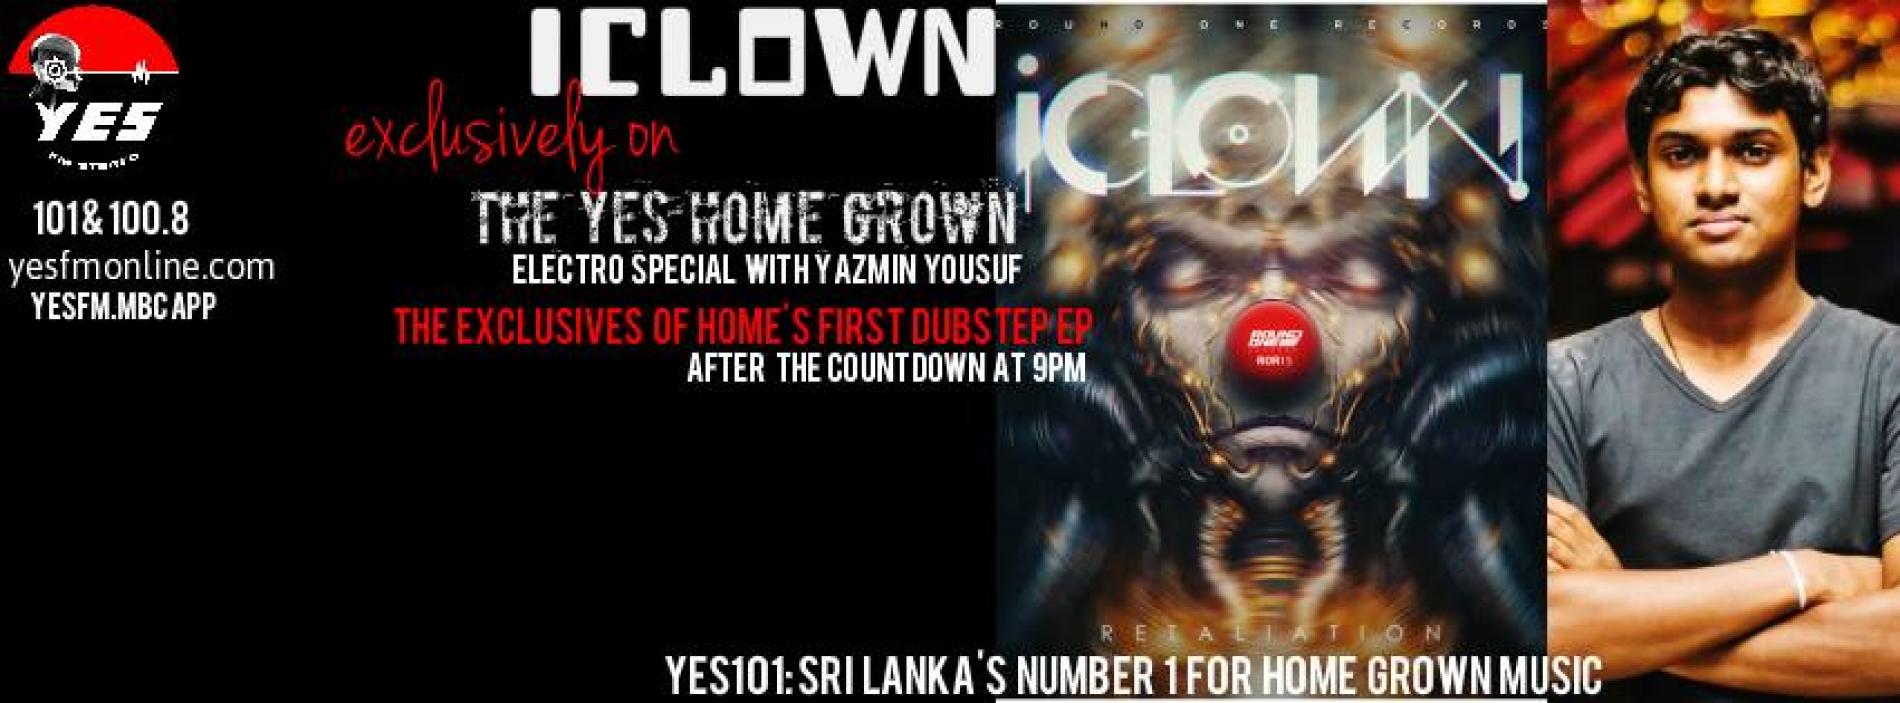 iClown On The YES Home Grown Top 15